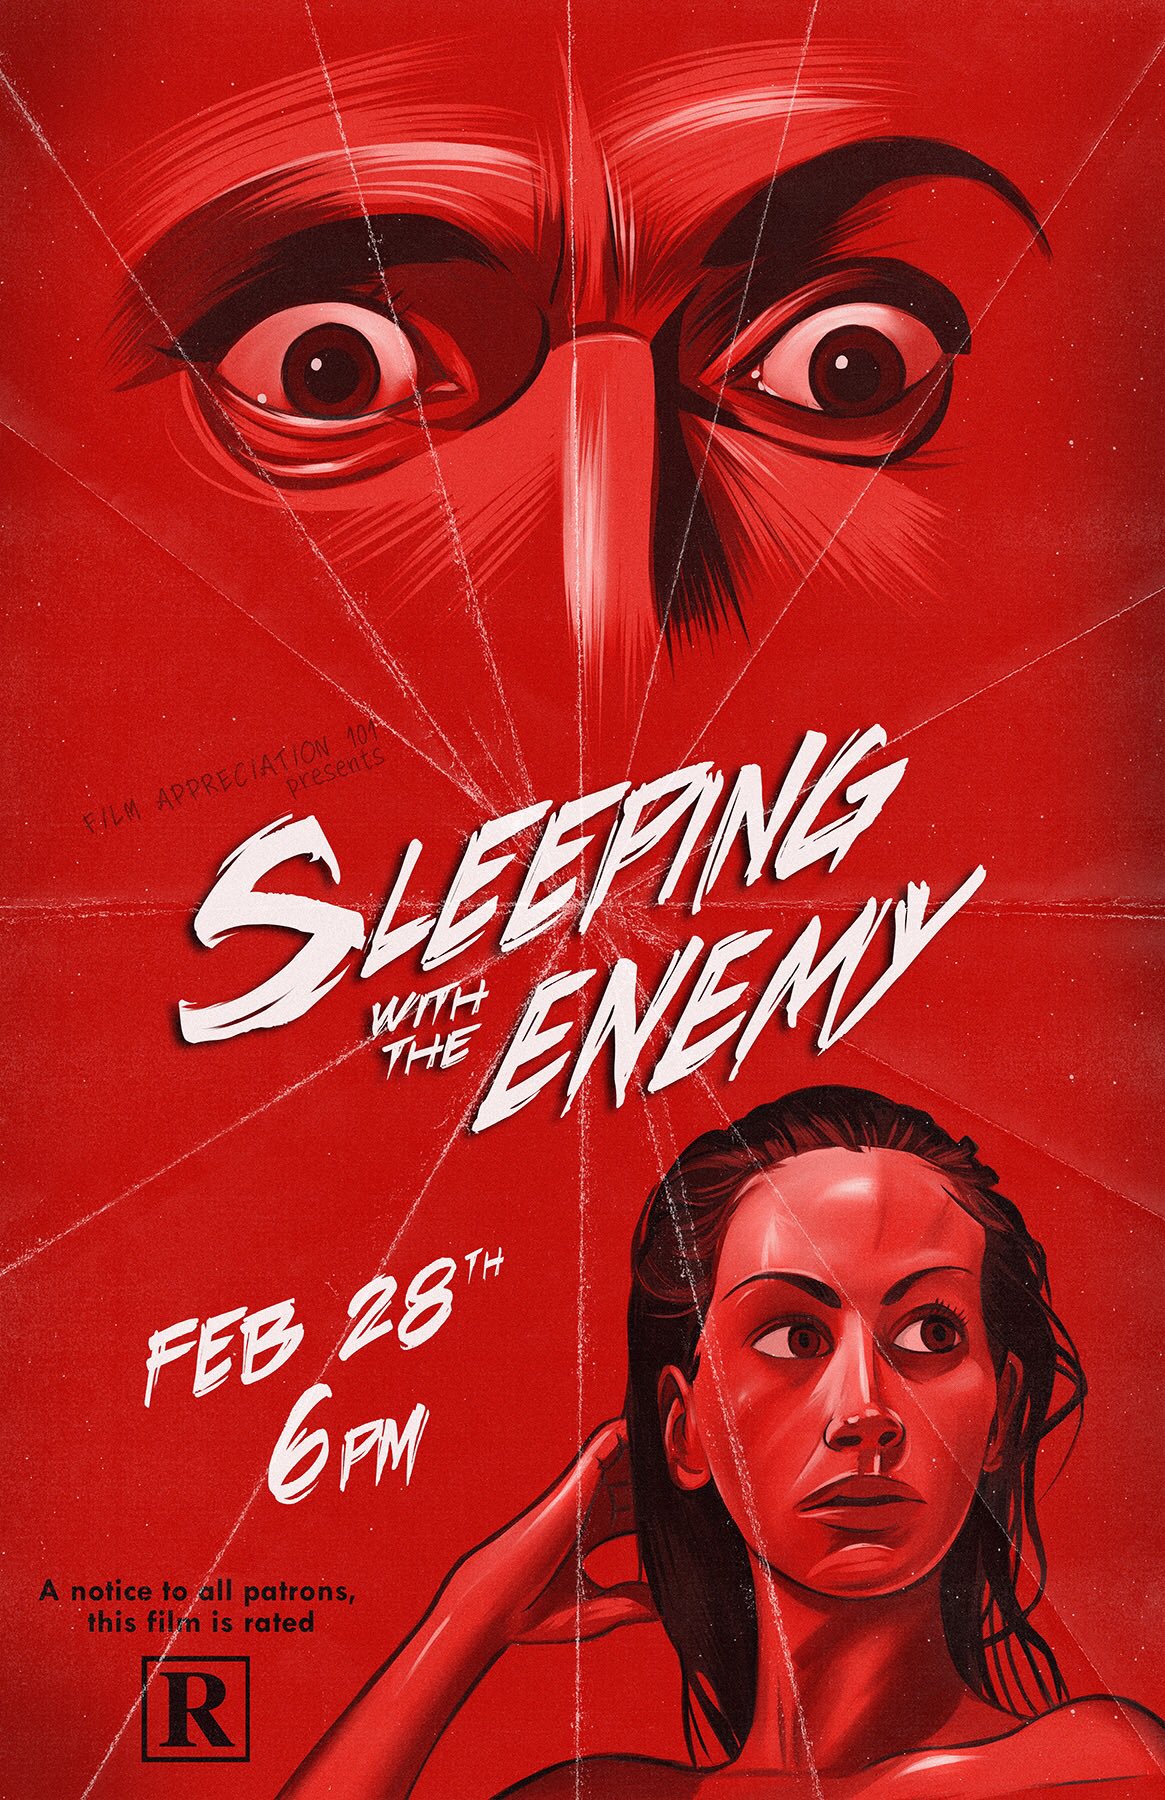 Sleeping with the Enemy, Full Movie